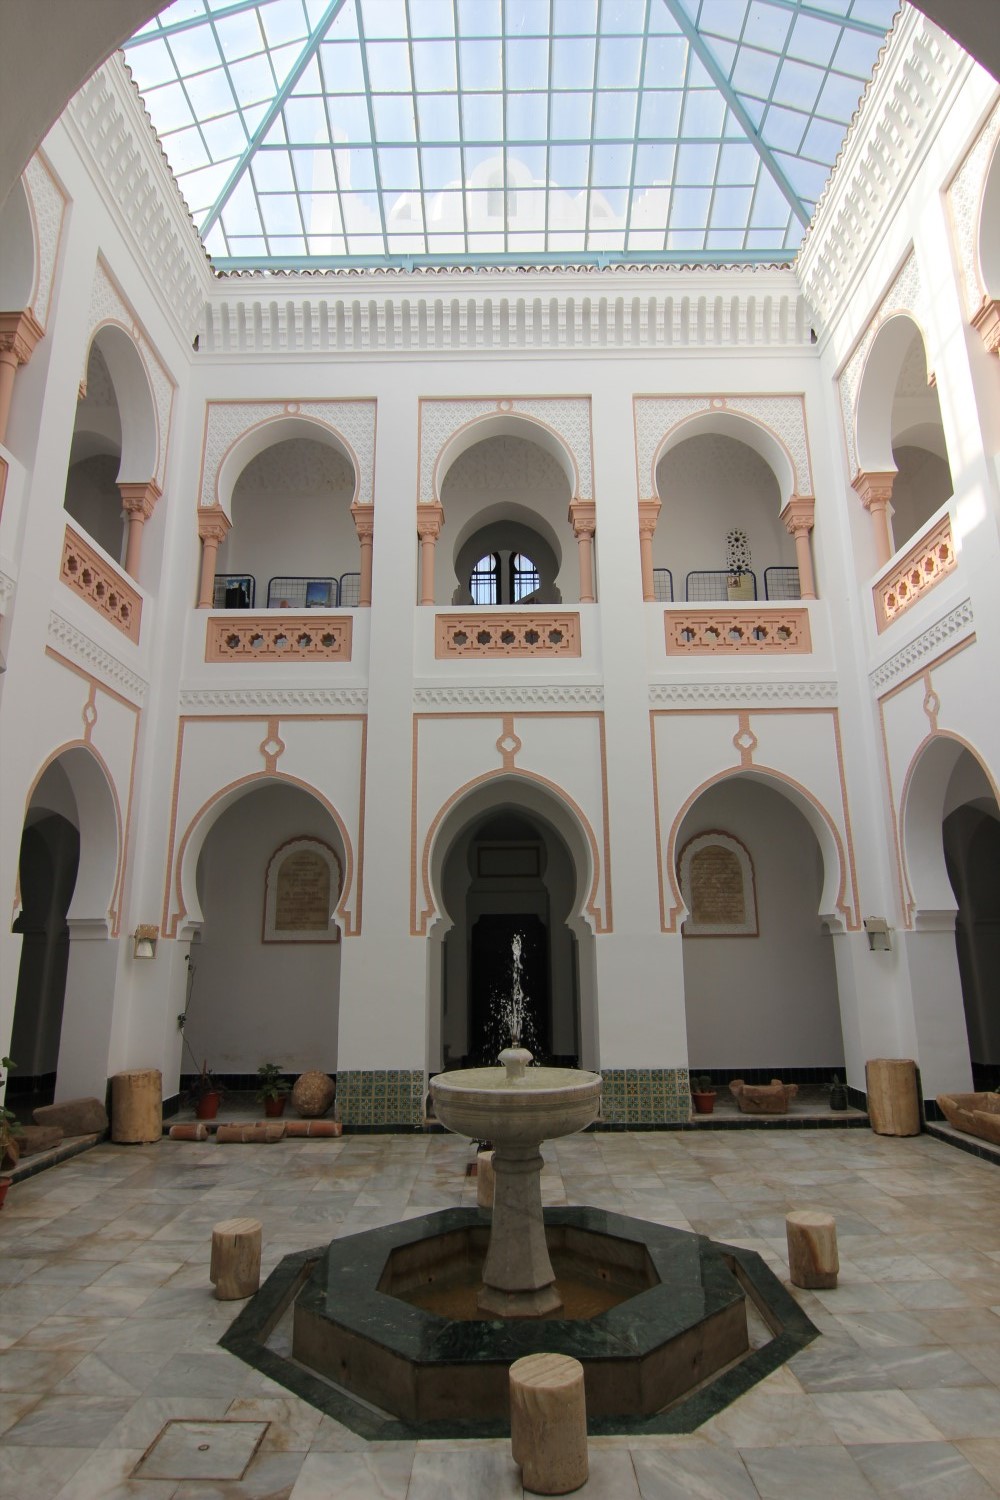 Frontal view of the front side of the courtyard